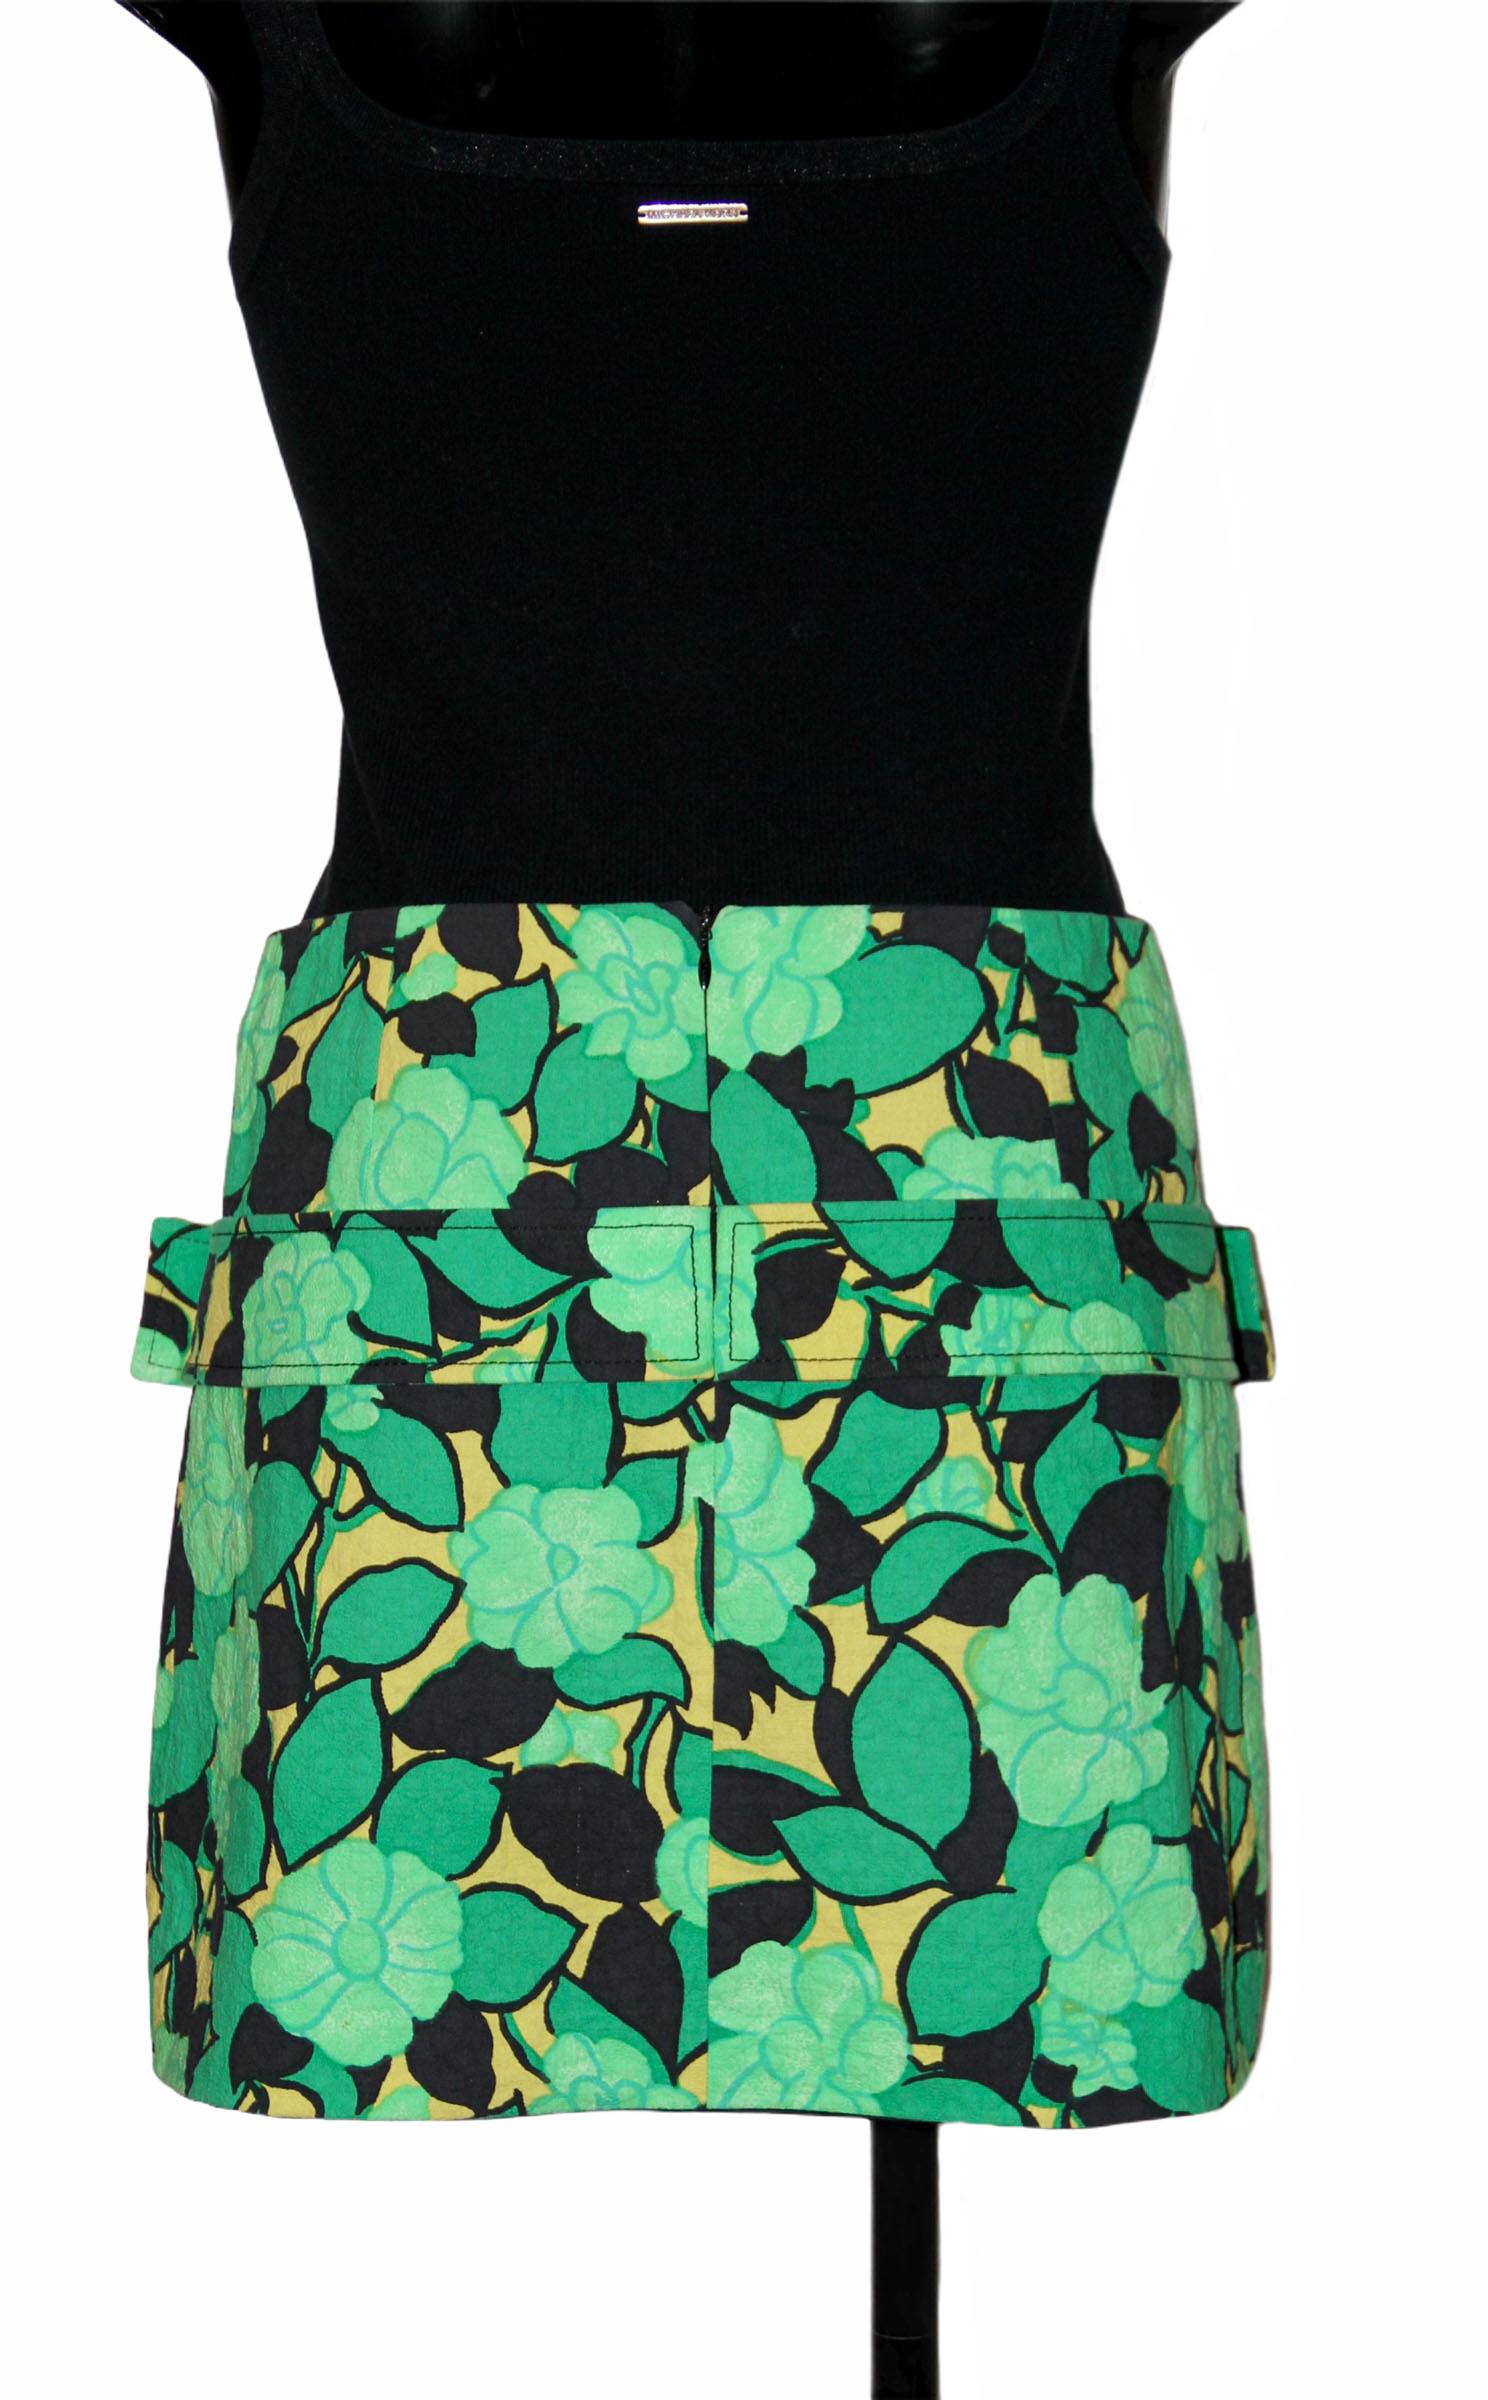 Women's Dolce & Gabbana Black and Green Mini Skirt with Strass Buckles